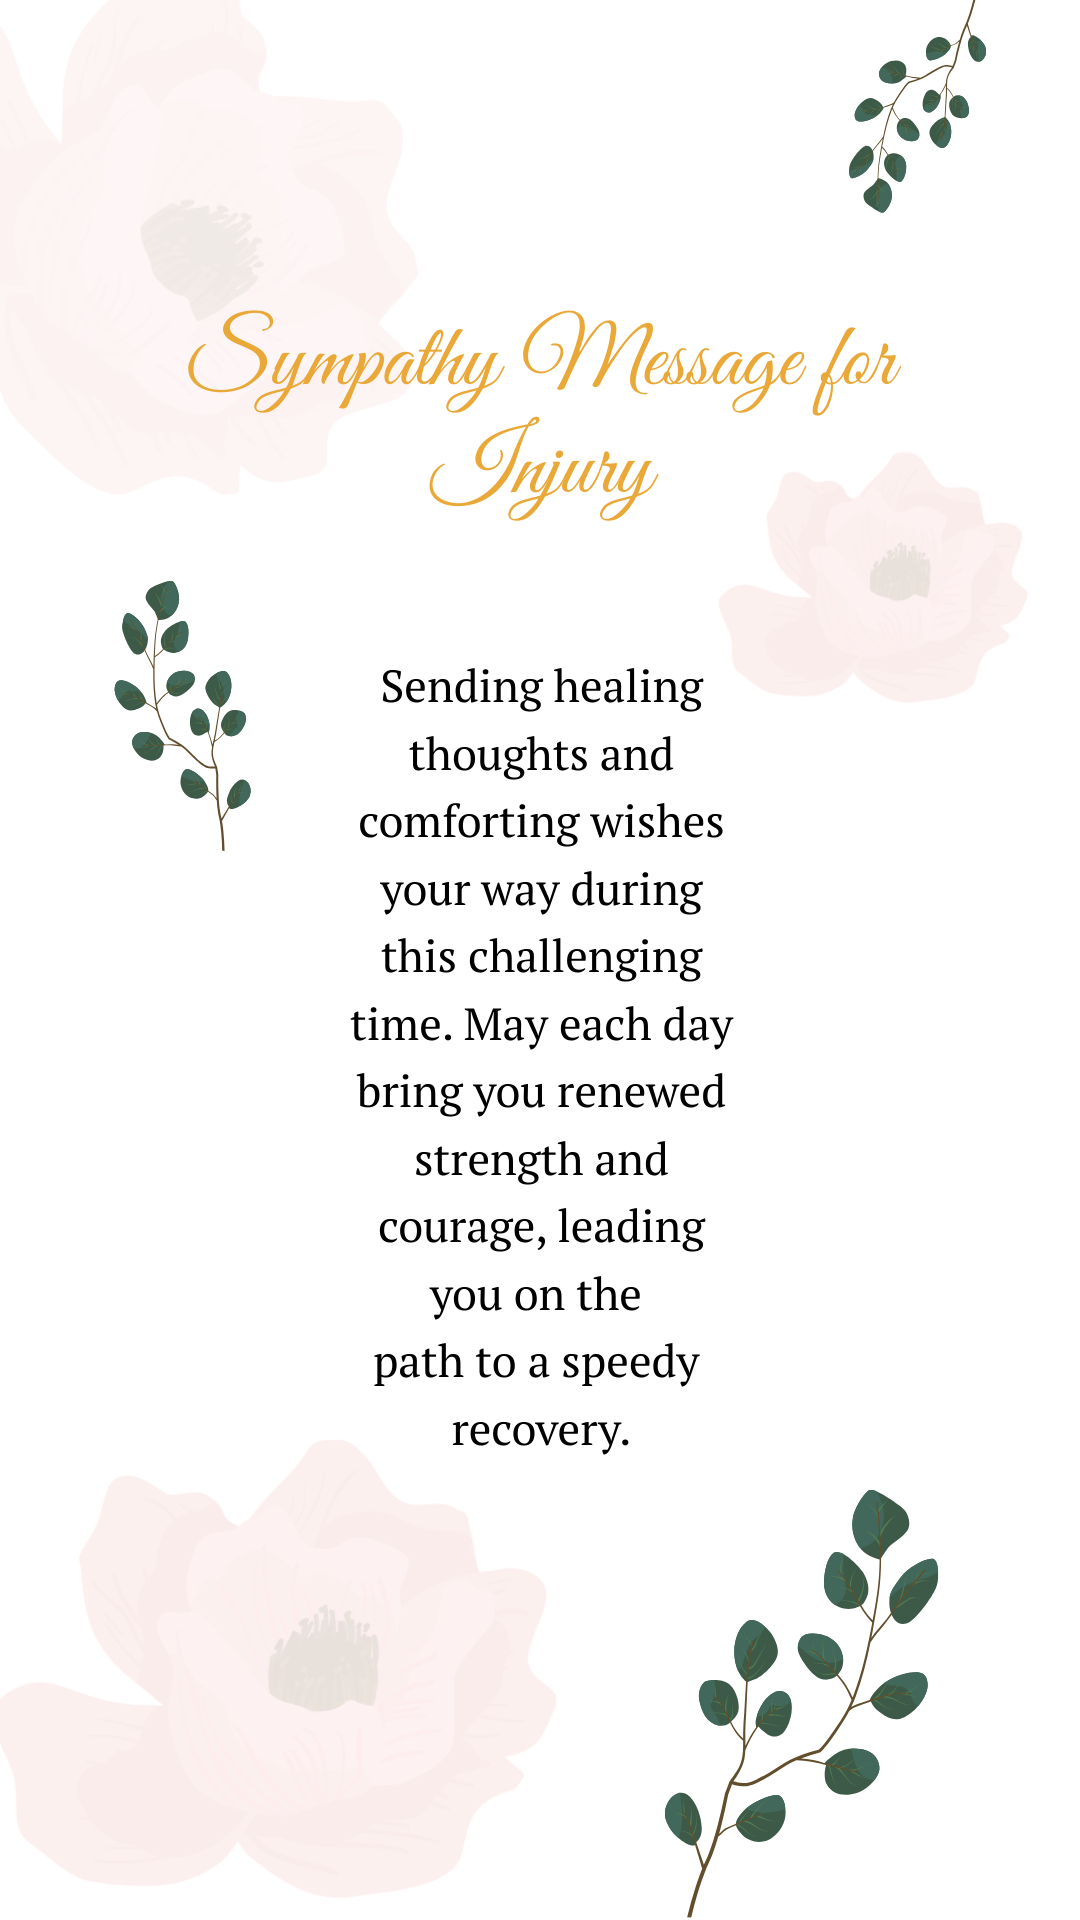 sympathy message for injury Template